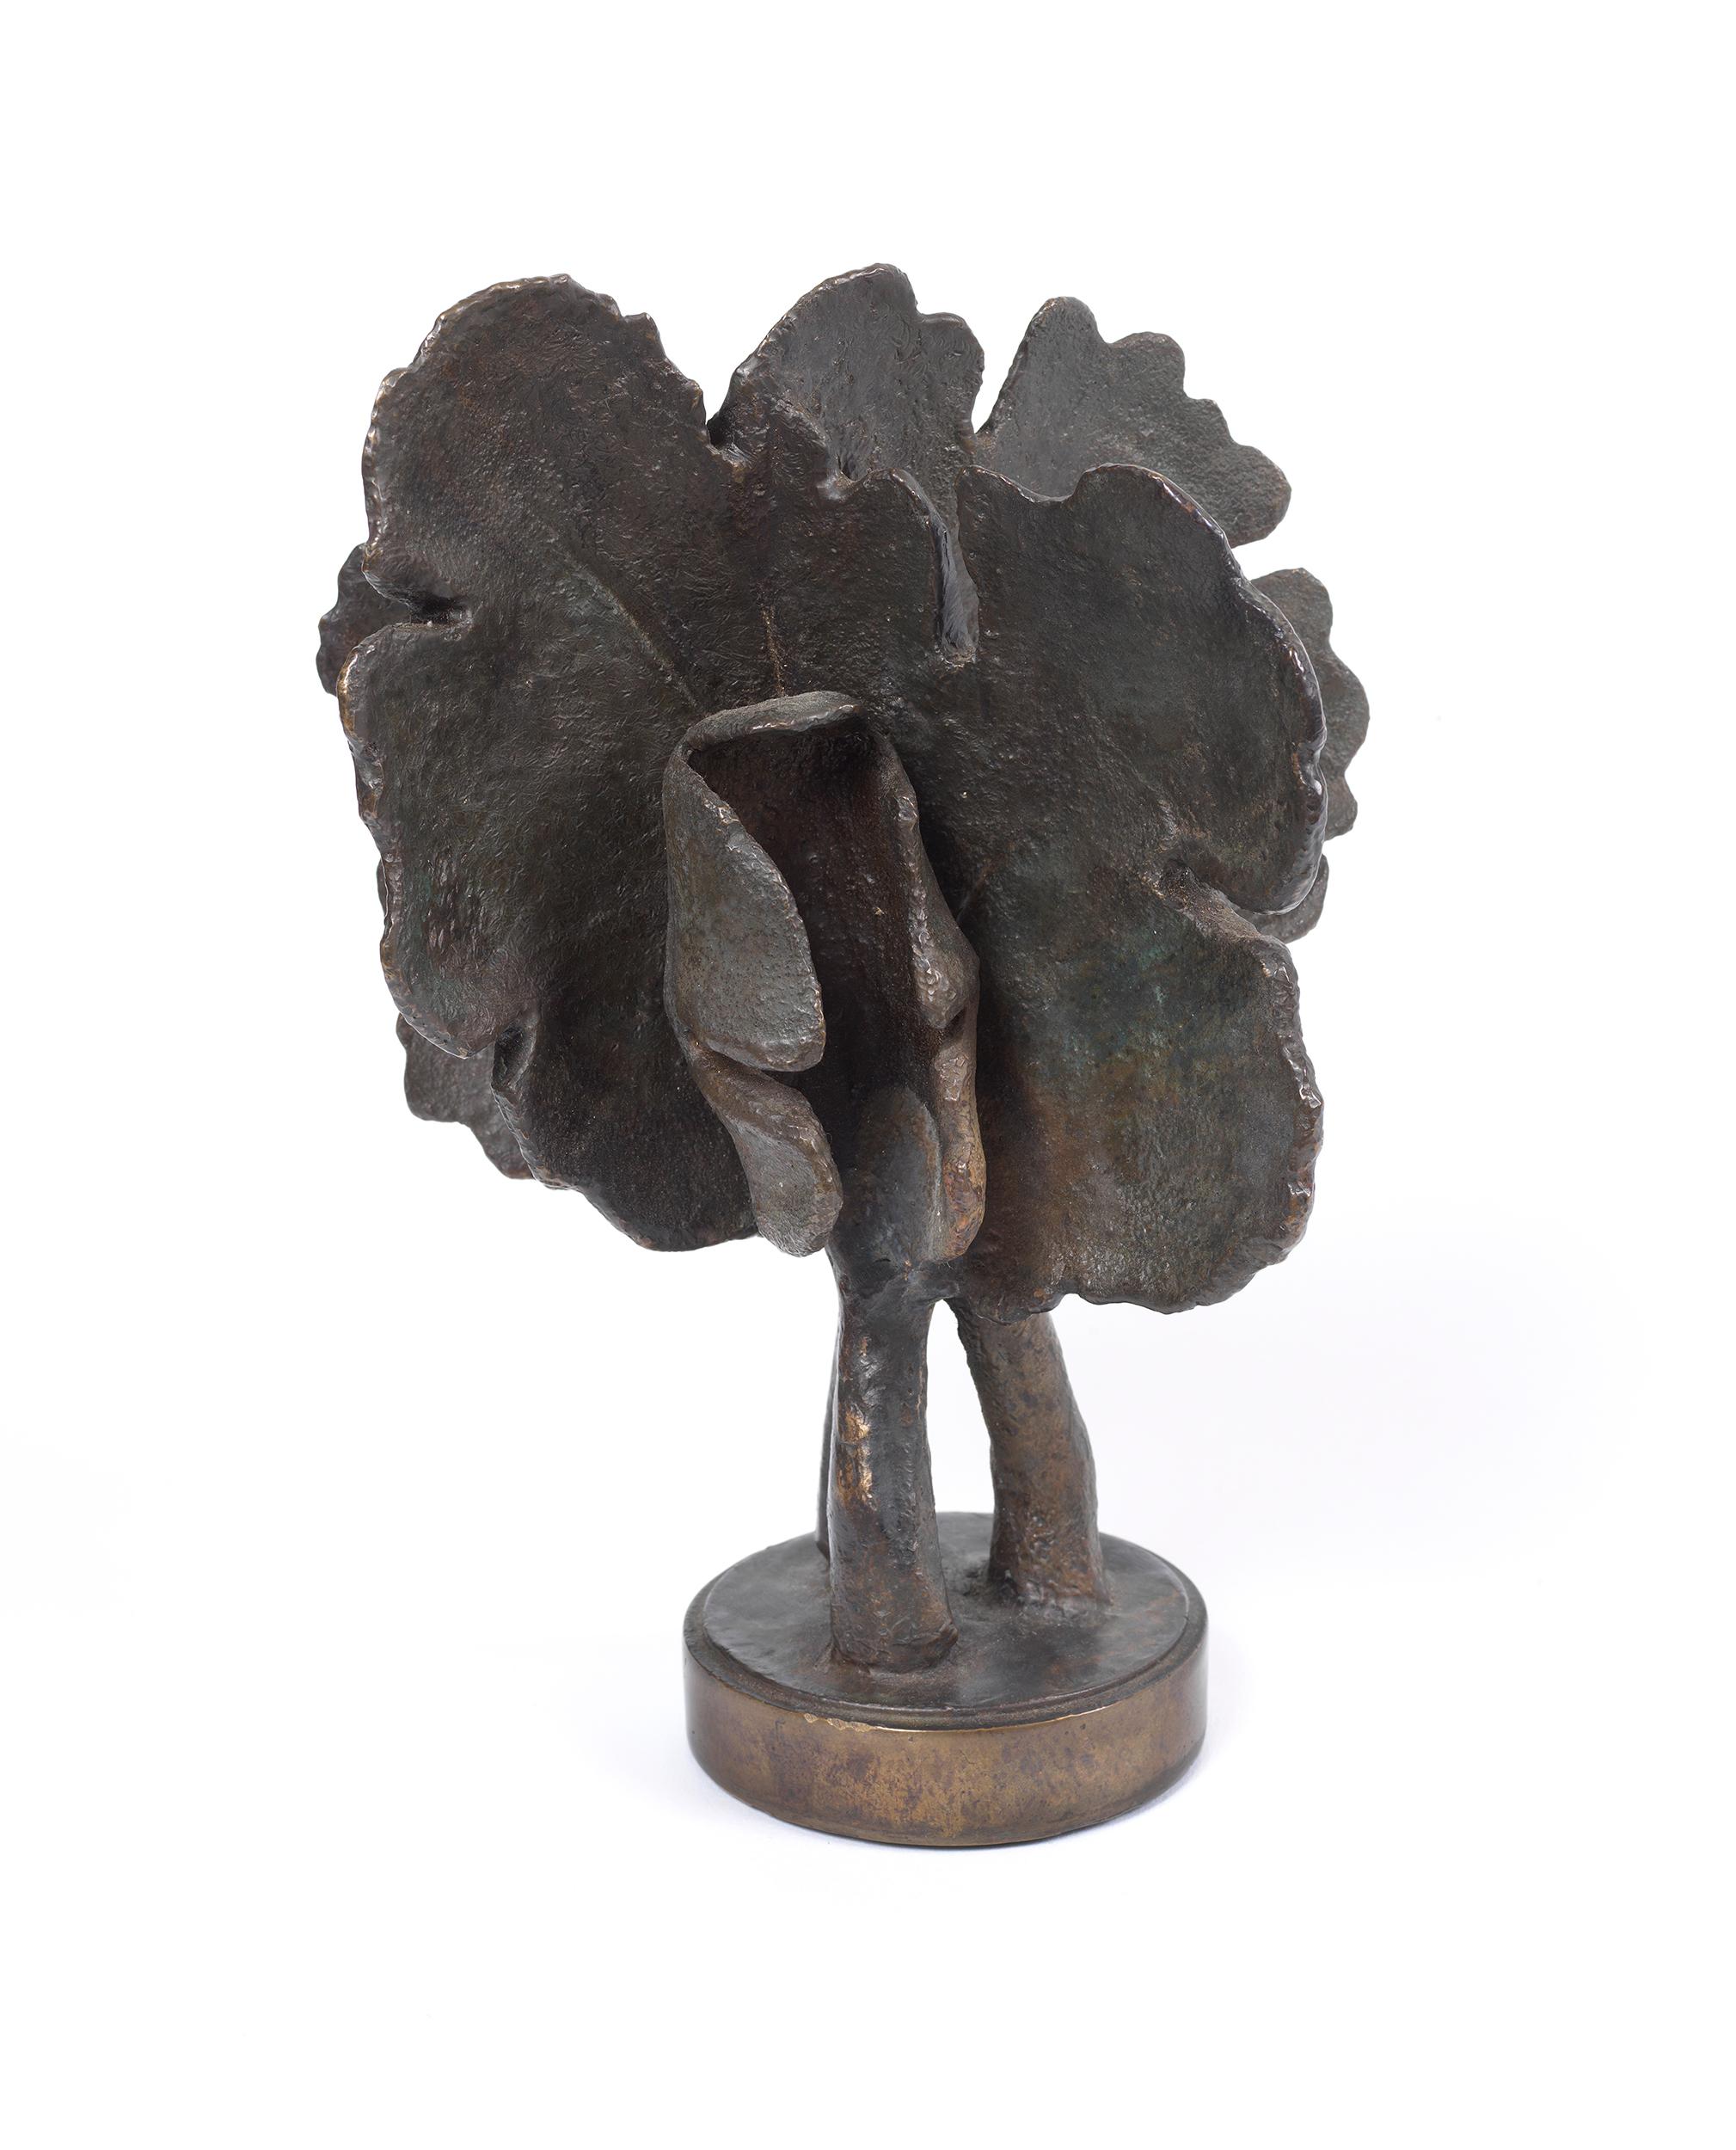 American Bloodroot, Small Scale Cast Bronze Botanical Sculpture with Subtle Patina